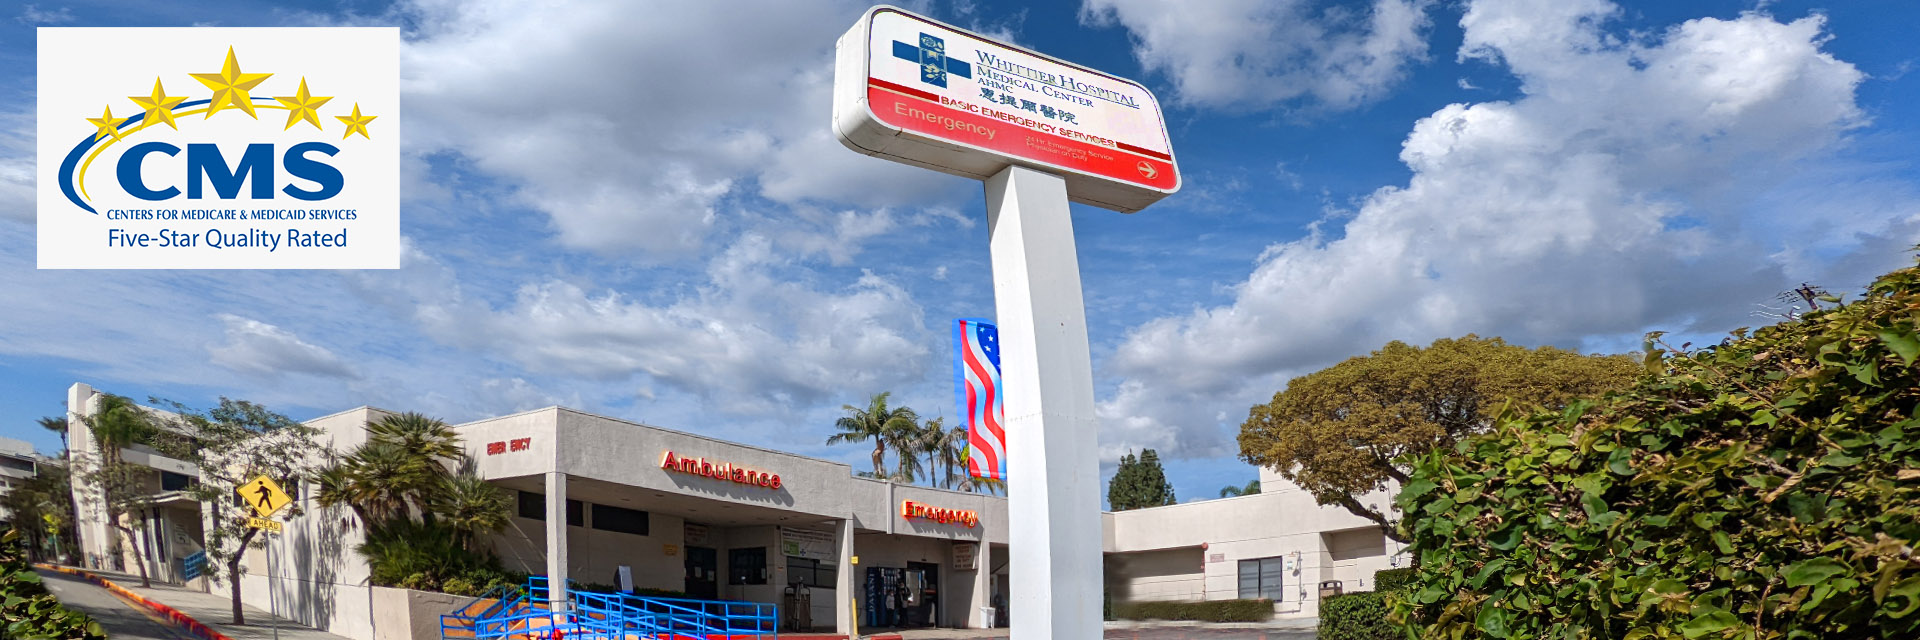 Whittier Hospital Medical Center
BASIC EMERGENCY SERVICES
Emergency 


CMS
CENTERS FOR MEDICARE AND MEDICAID SERVICES